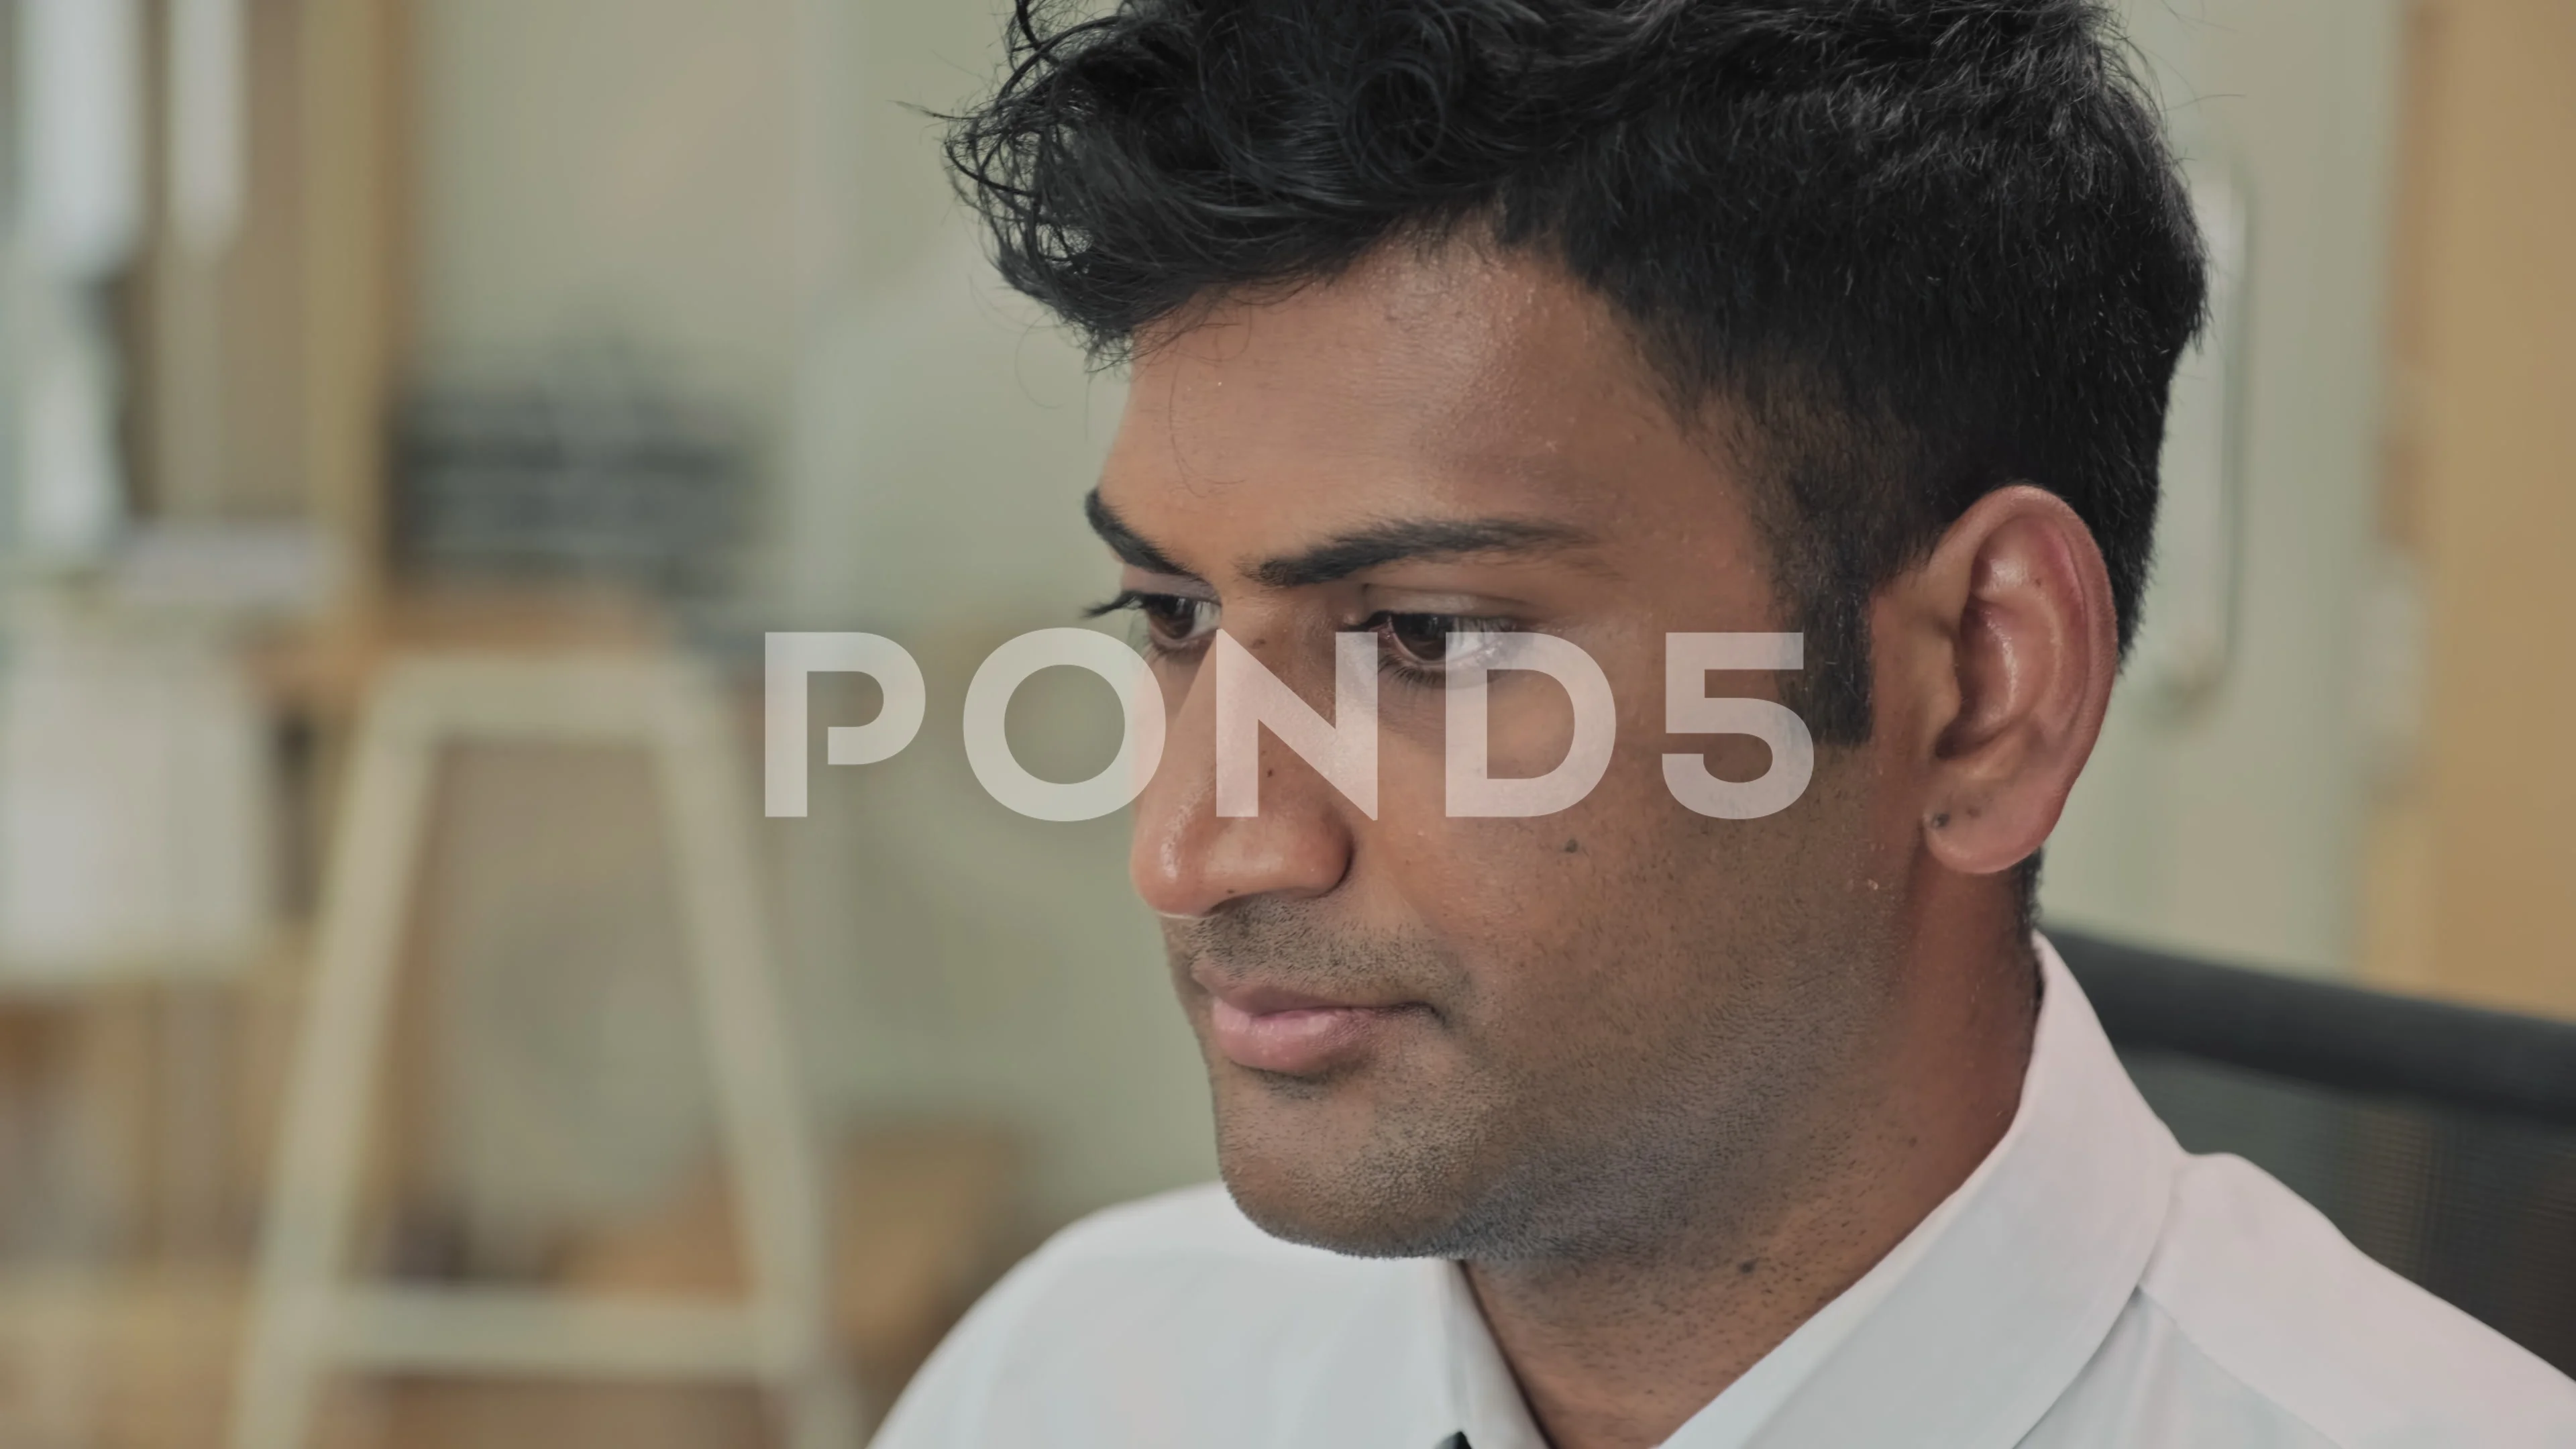 Indian Security Manager Working on Compu... | Stock Video | Pond5